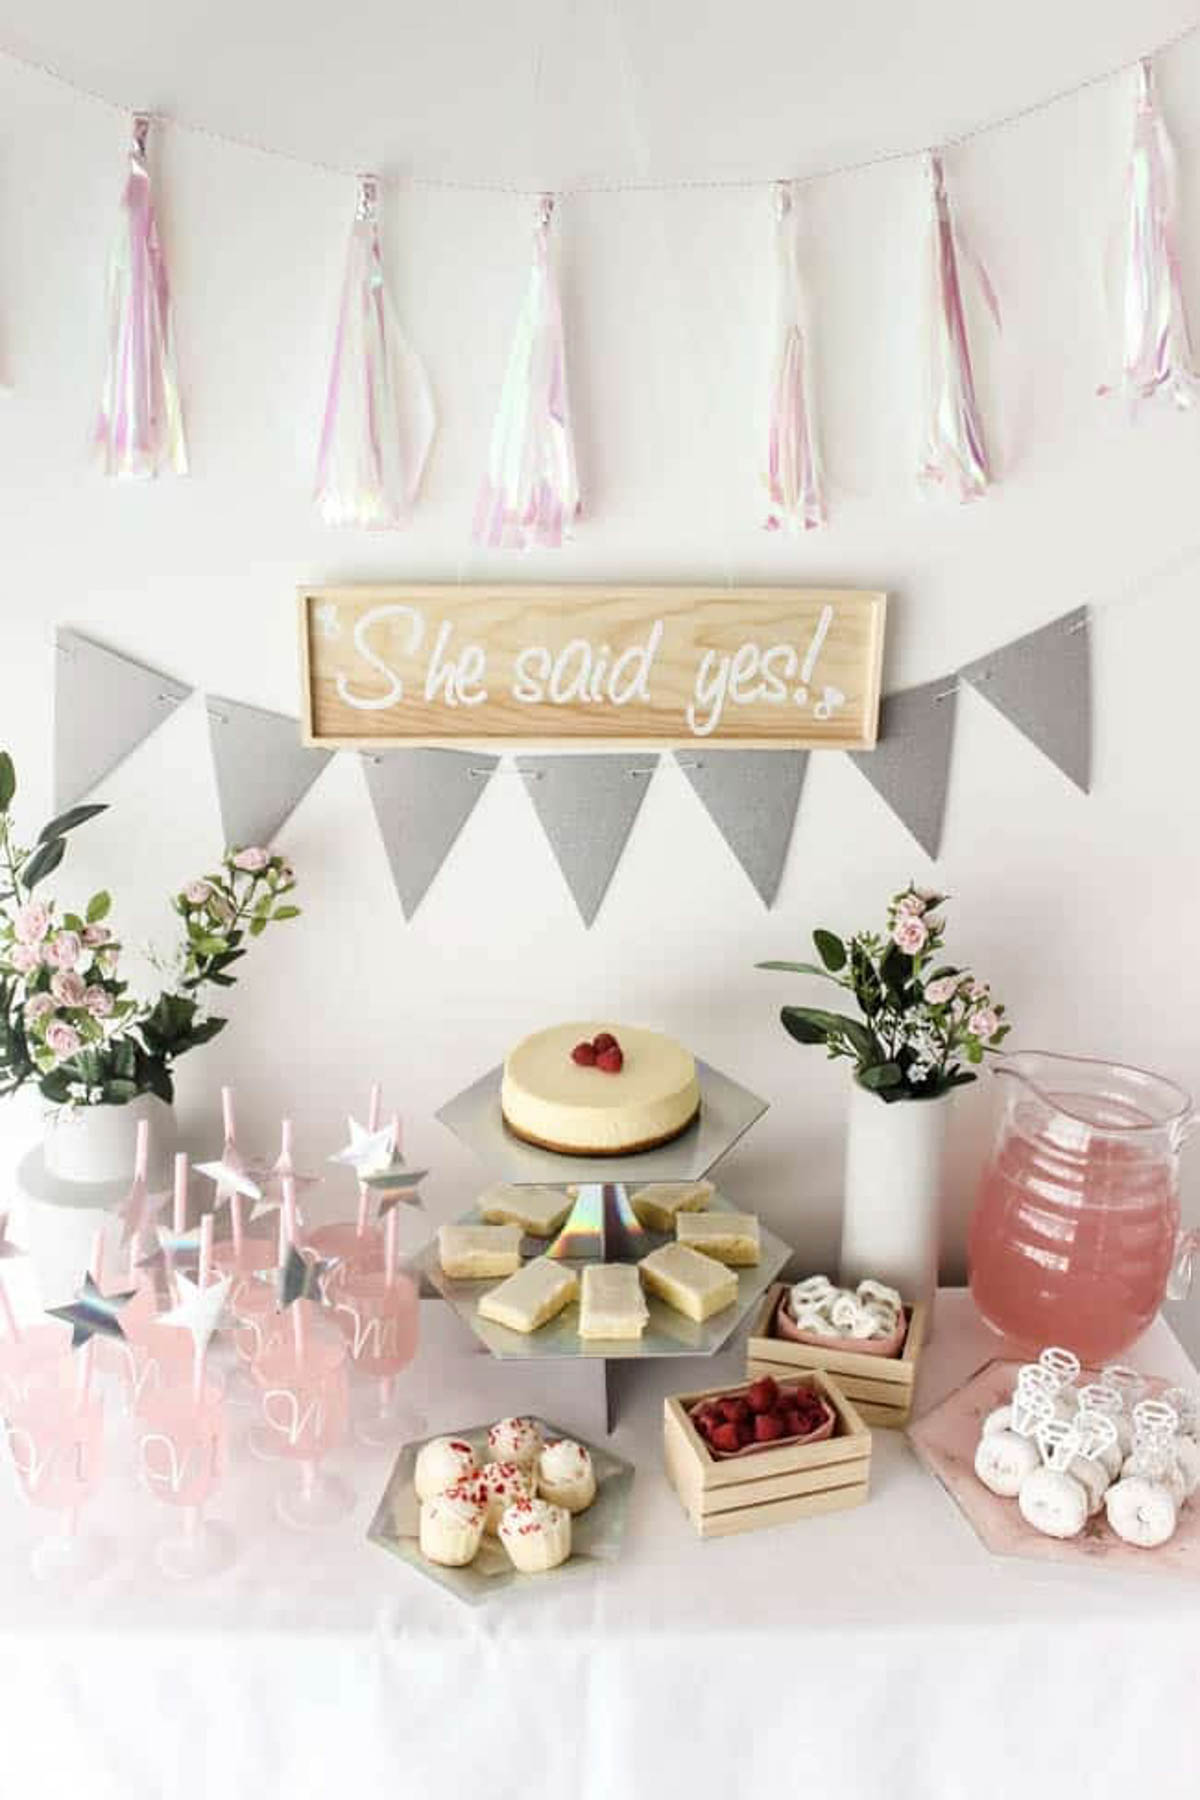 Bridal shower decorations on a dessert table